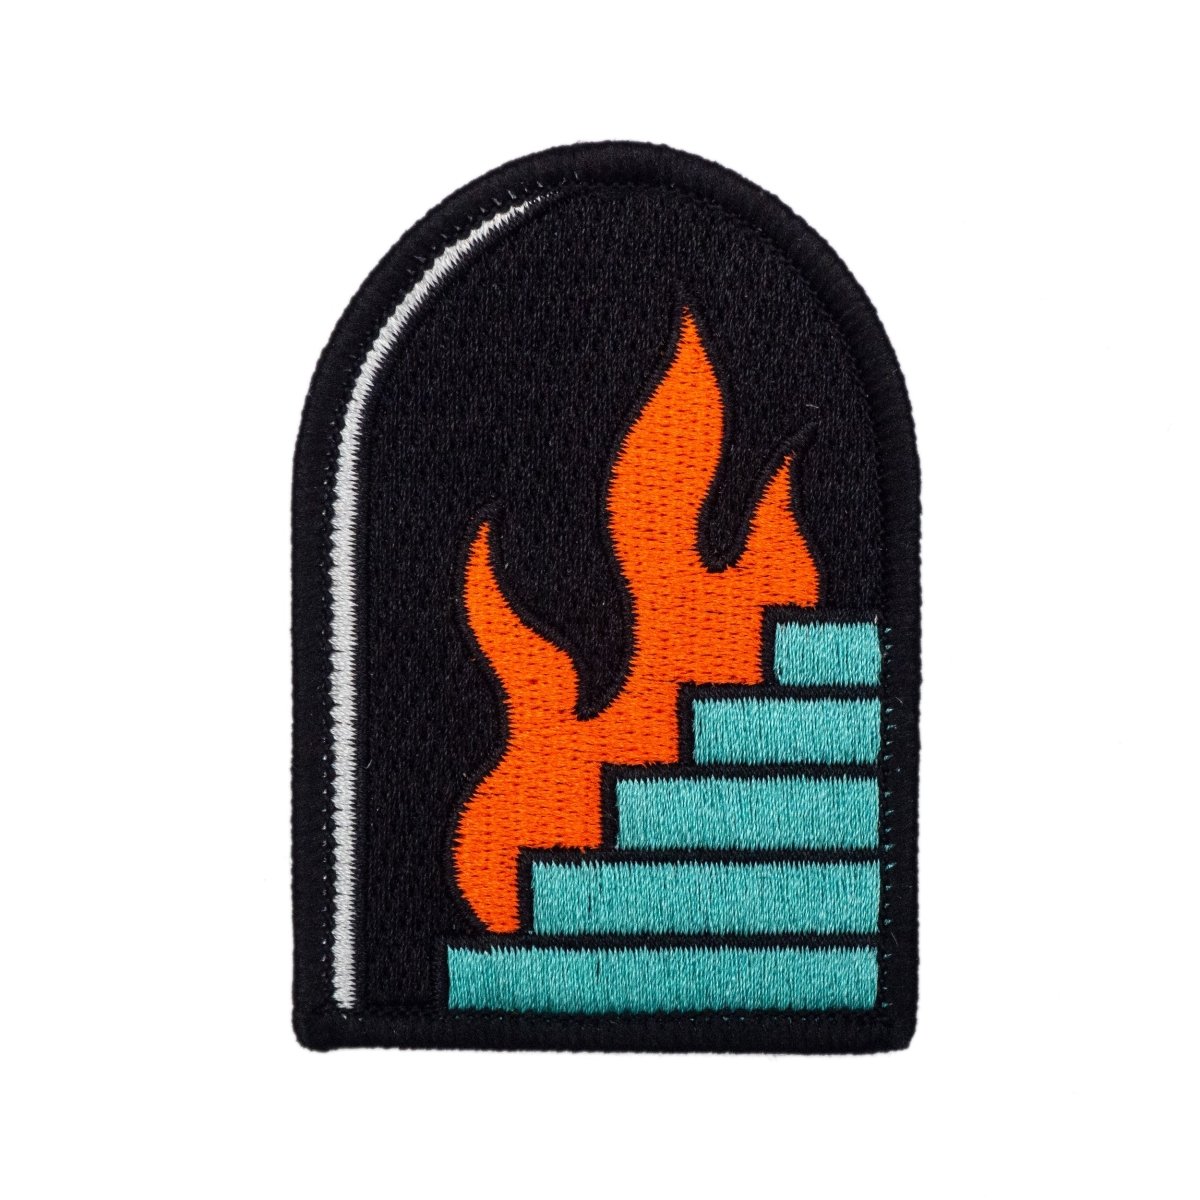 Fire stairs portal patch - Patch - Pretty Bad Co.